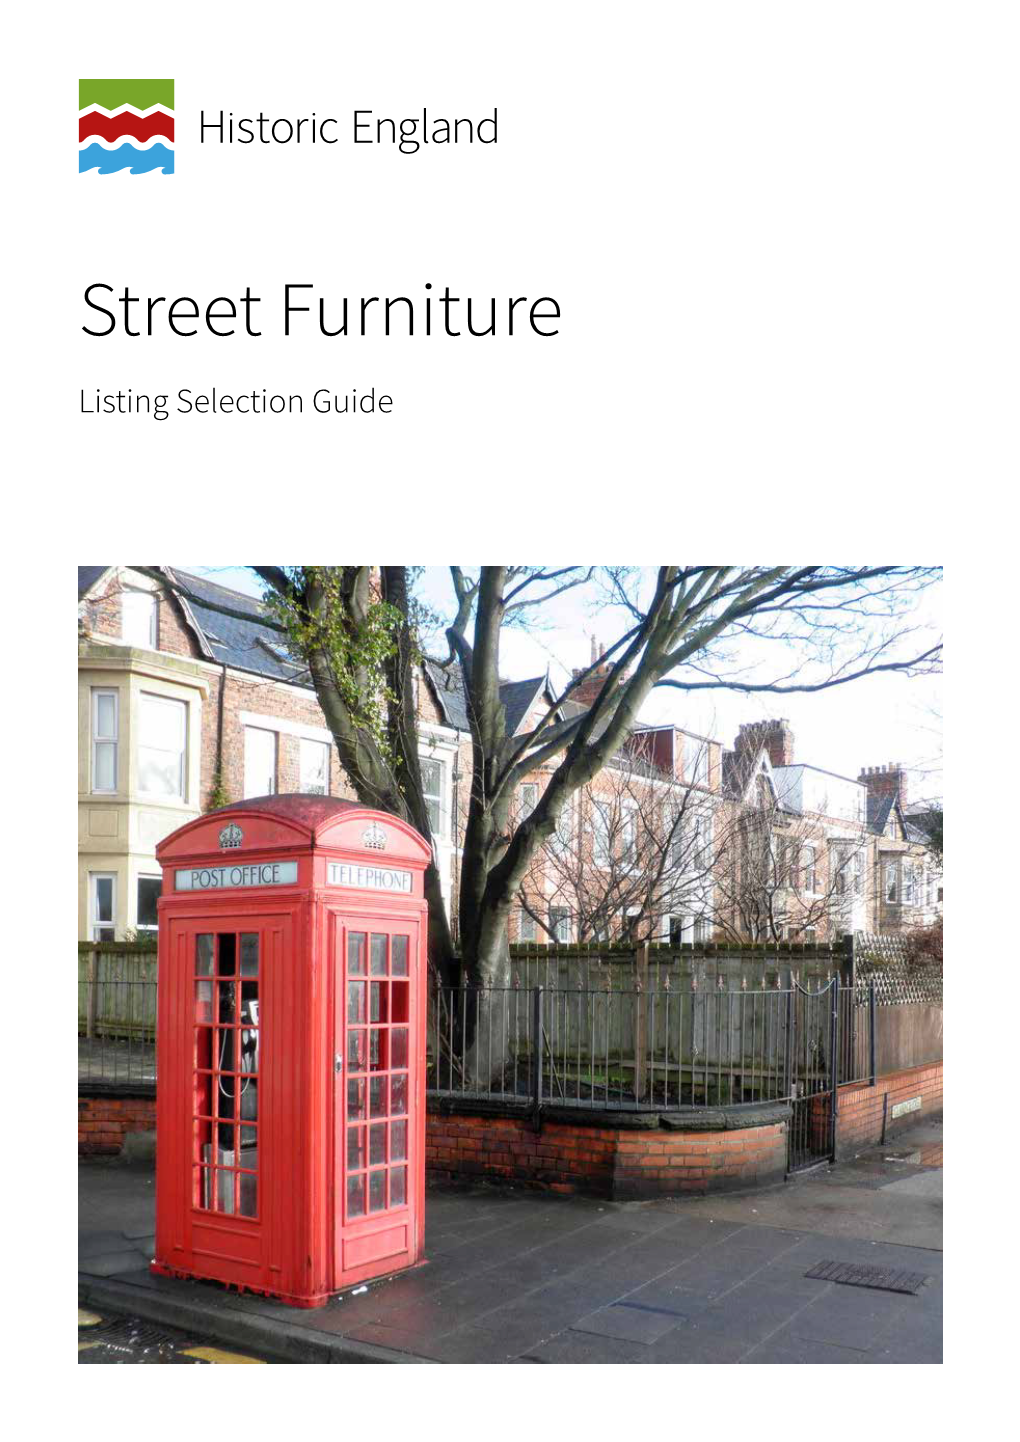 Street Furniture Listing Selection Guide Summary